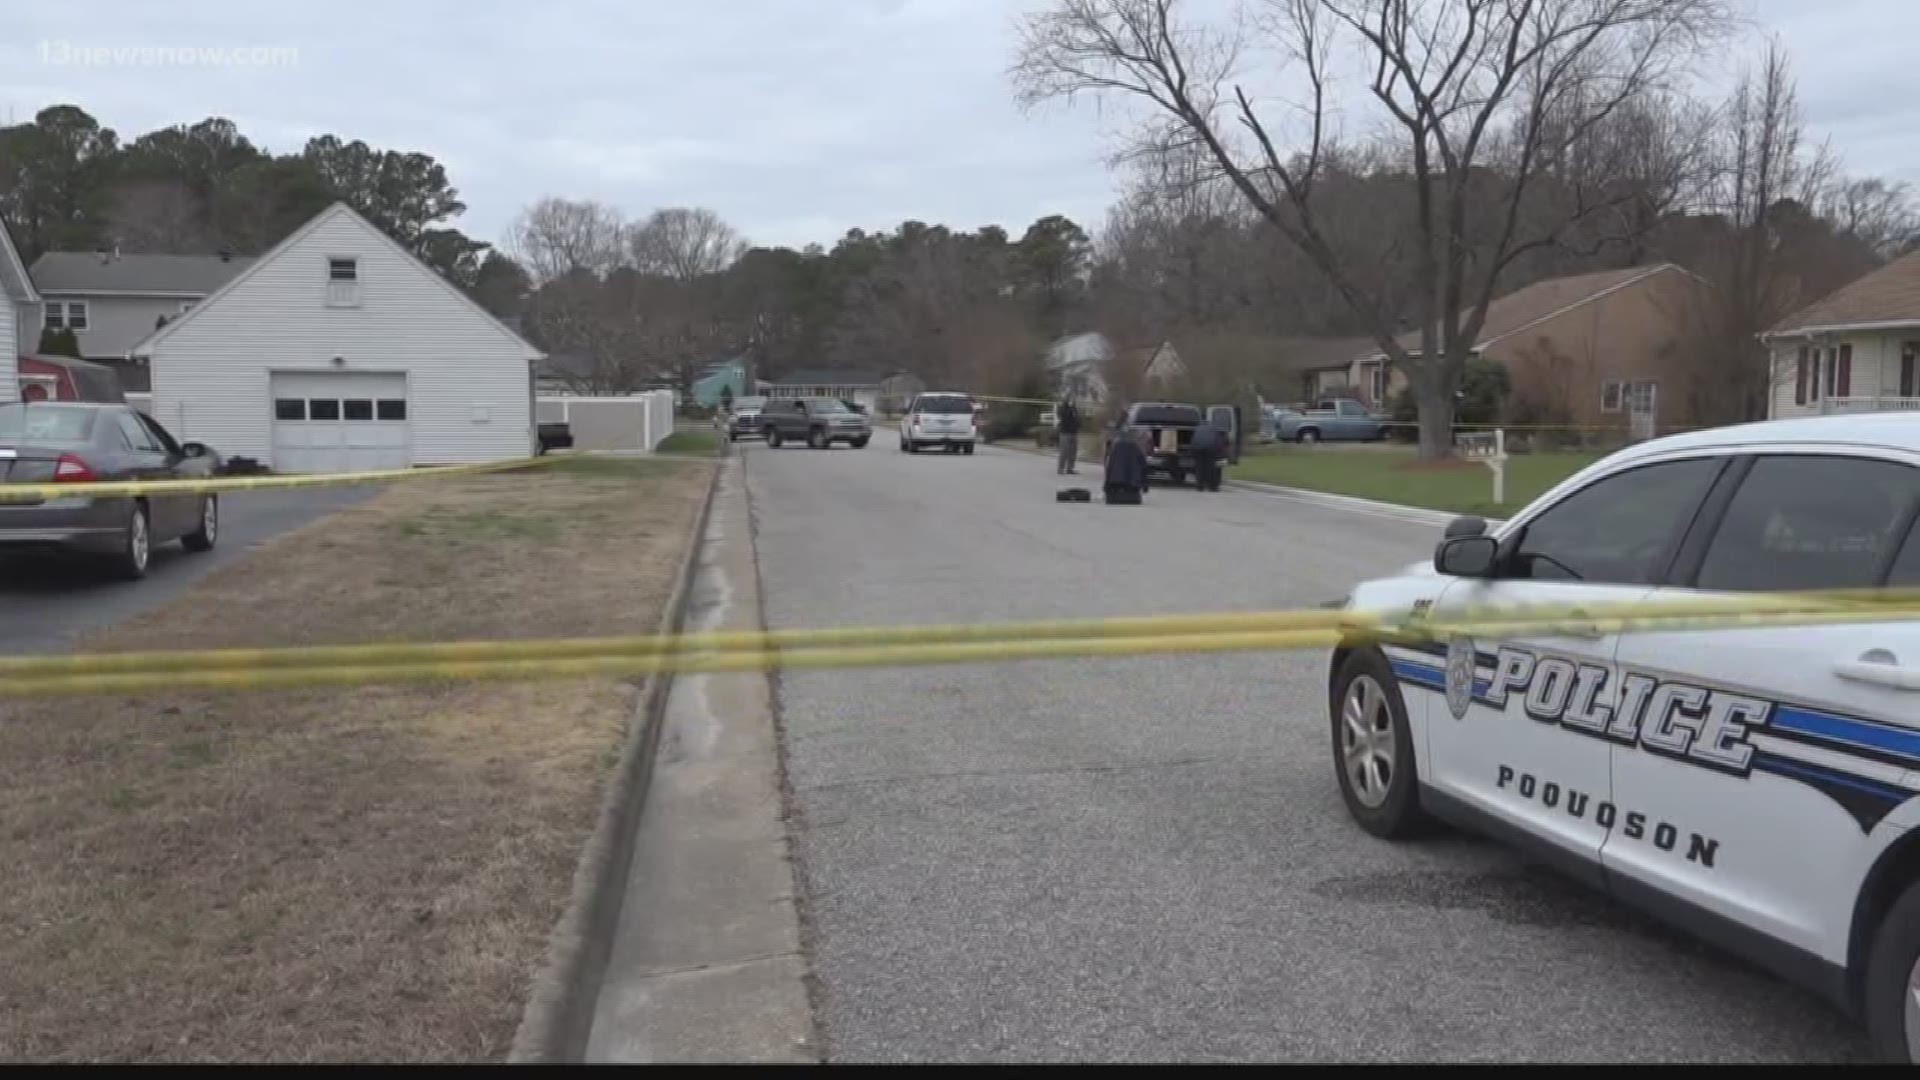 The Poquoson police are investigating after a man was found dead inside a pickup truck.